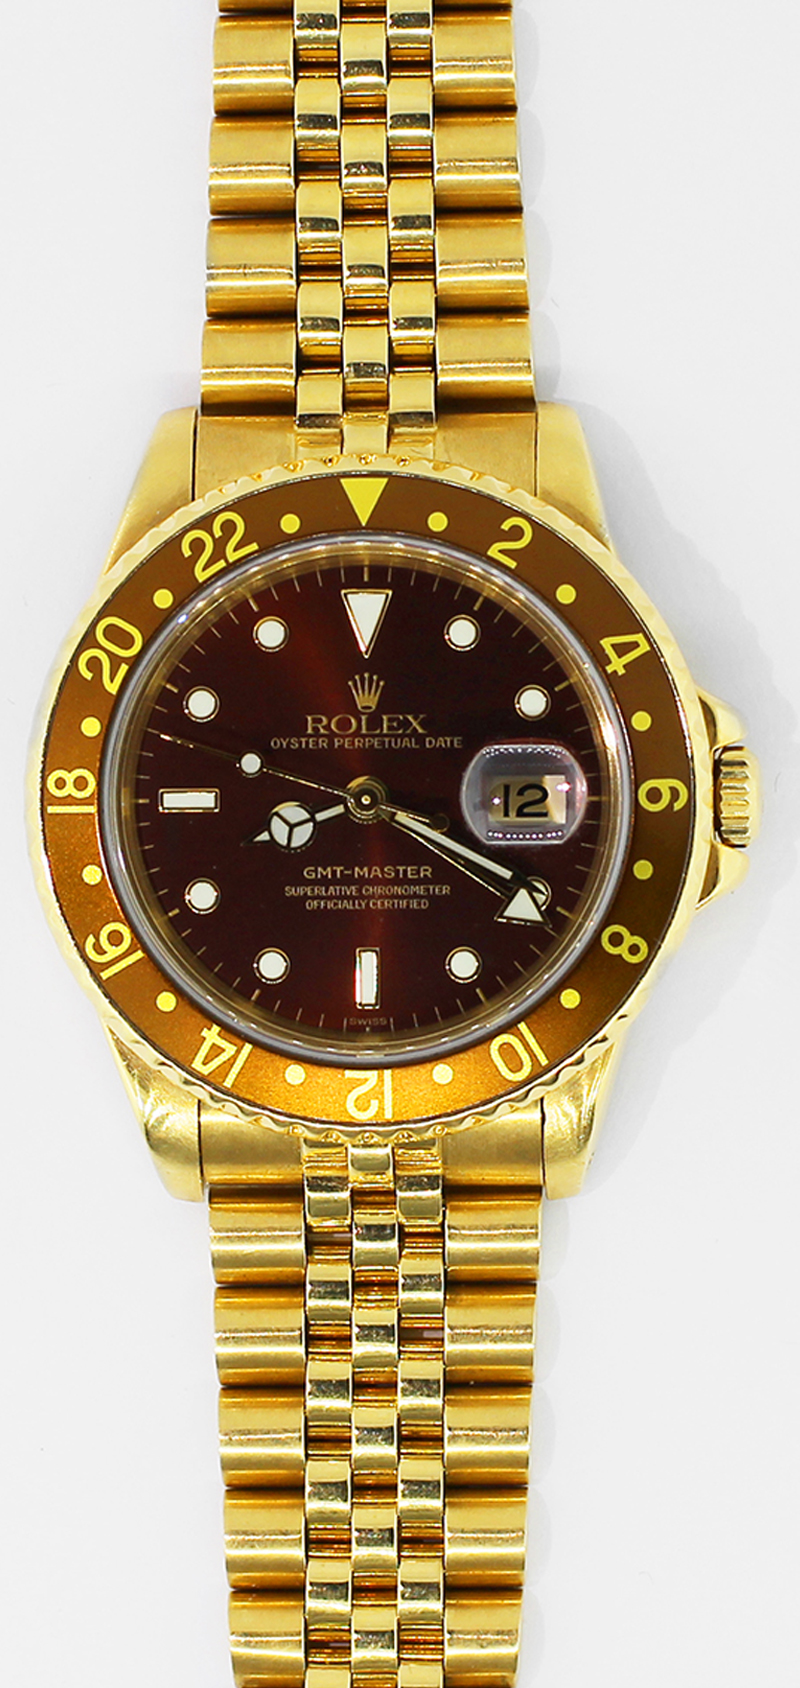 Rolex 18k Yellow Gold GMT-Master 16758 on Jubliee Bracelet